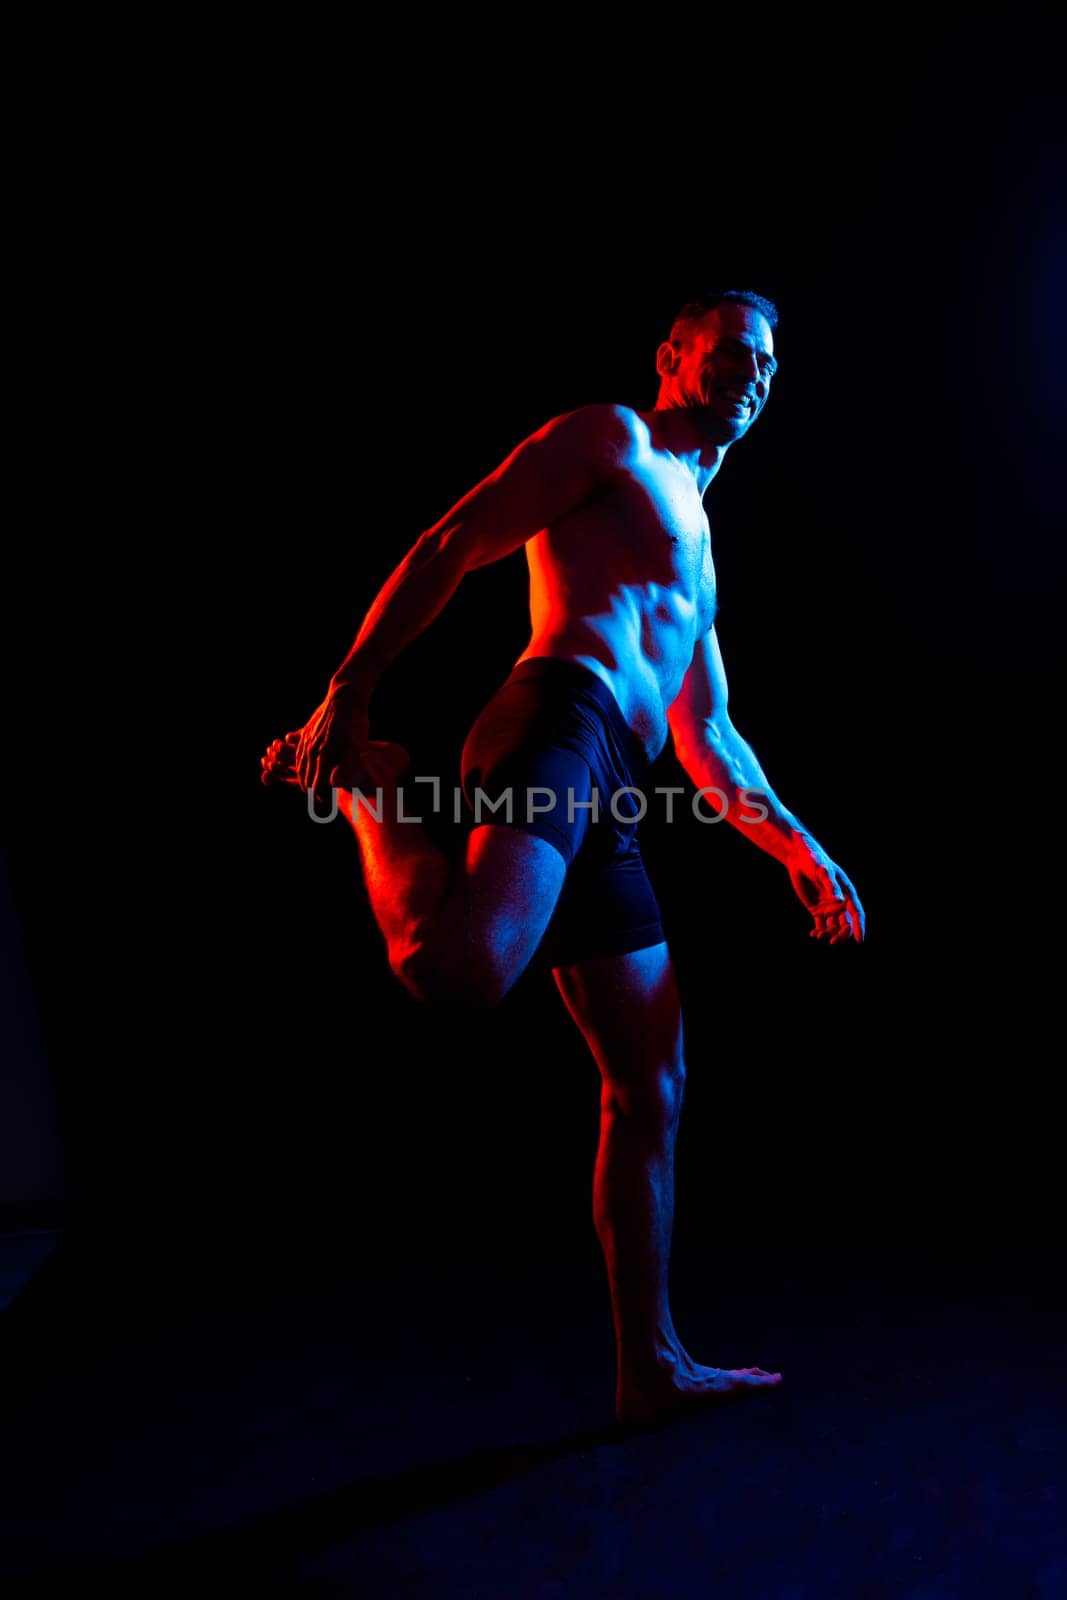 Portrait of man, bodybuilder and bicep flex in a studio, background and exercise for muscular power.